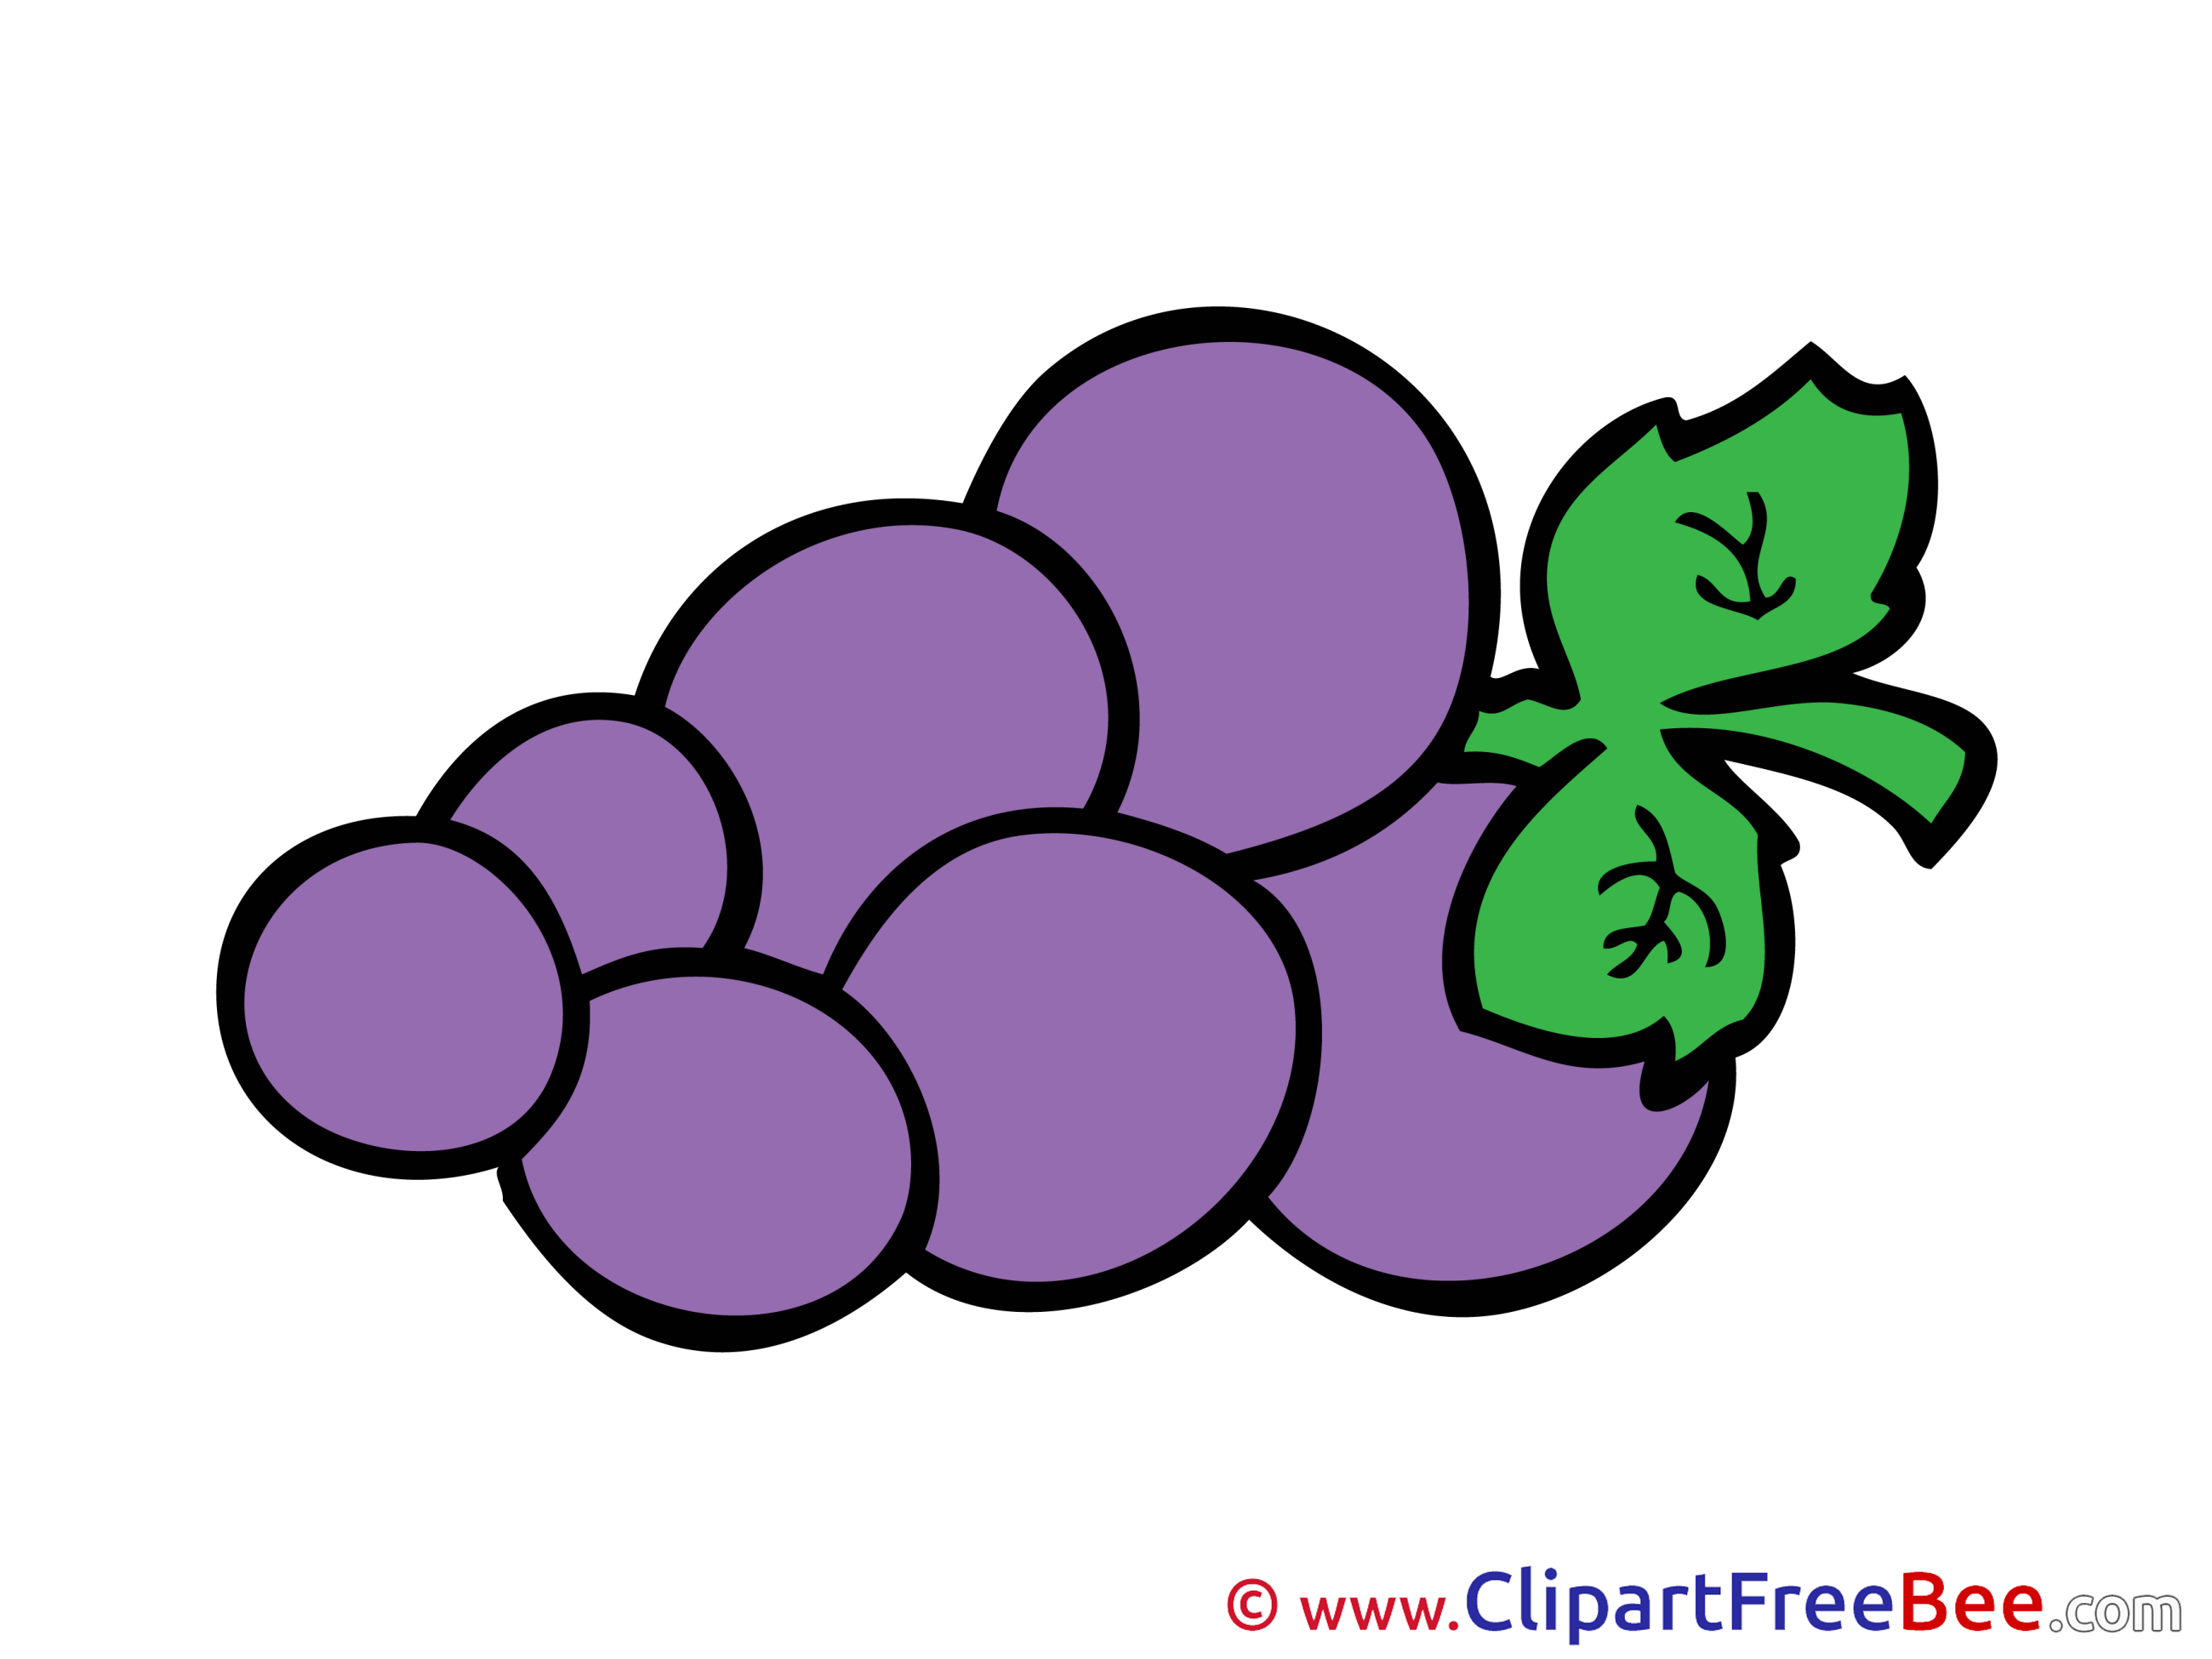 Grape free Cliparts for download